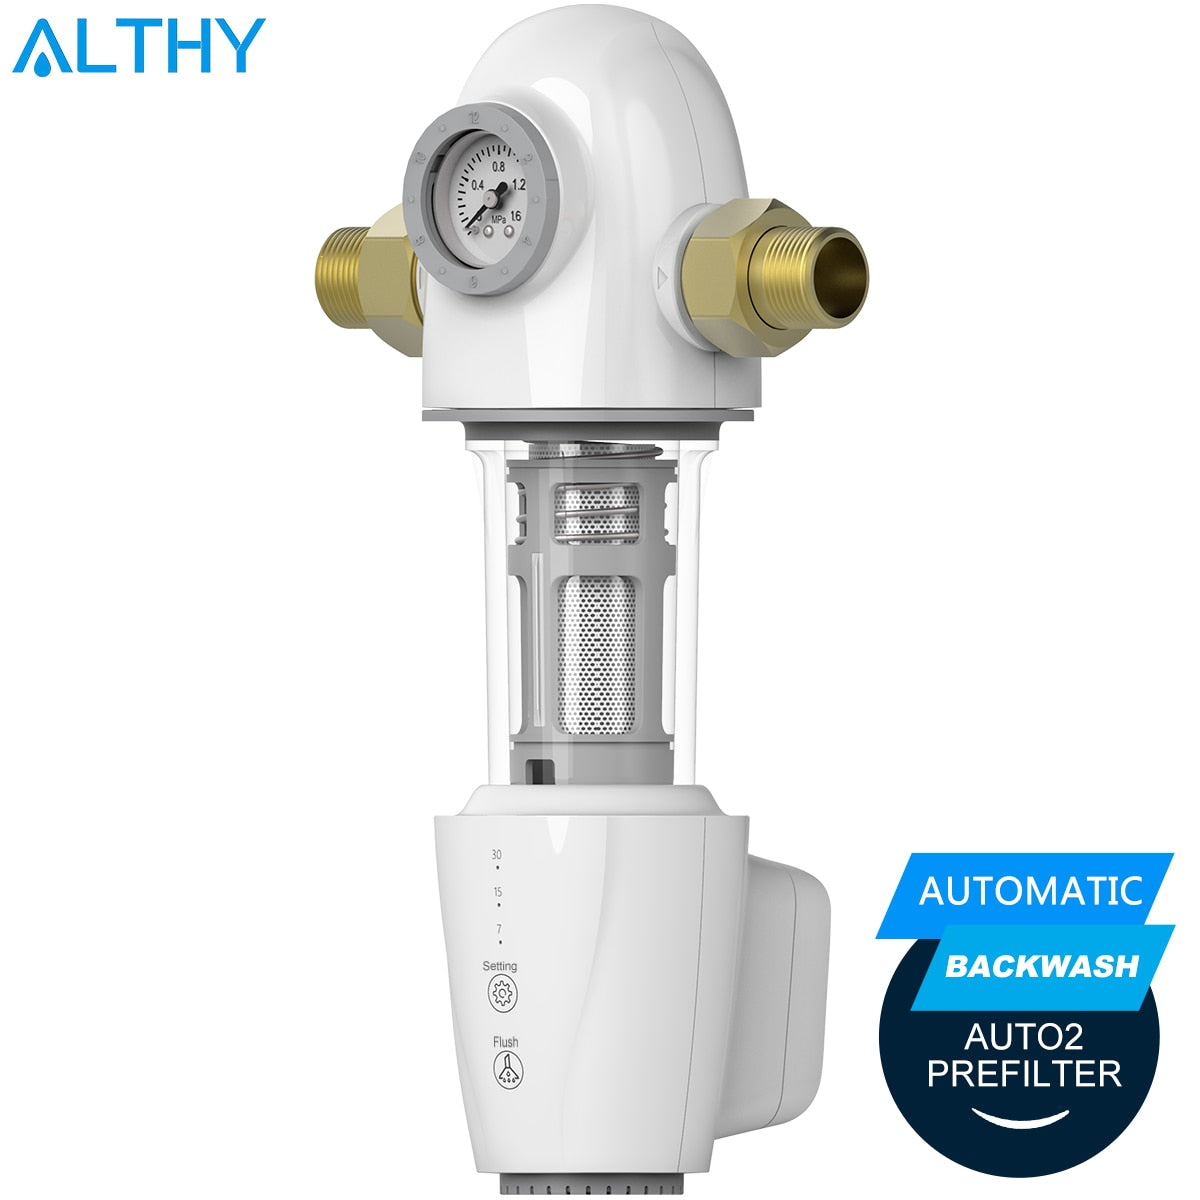 ALTHY PRE-AUTO2 Automatic Flushing Backwash Prefilter Spin Down Sediment Water Filter Central Whole House Purifier System HostandFilterChina Hardware > Plumbing > Water Dispensing & Filtration 338.99 EZYSELLA SHOP